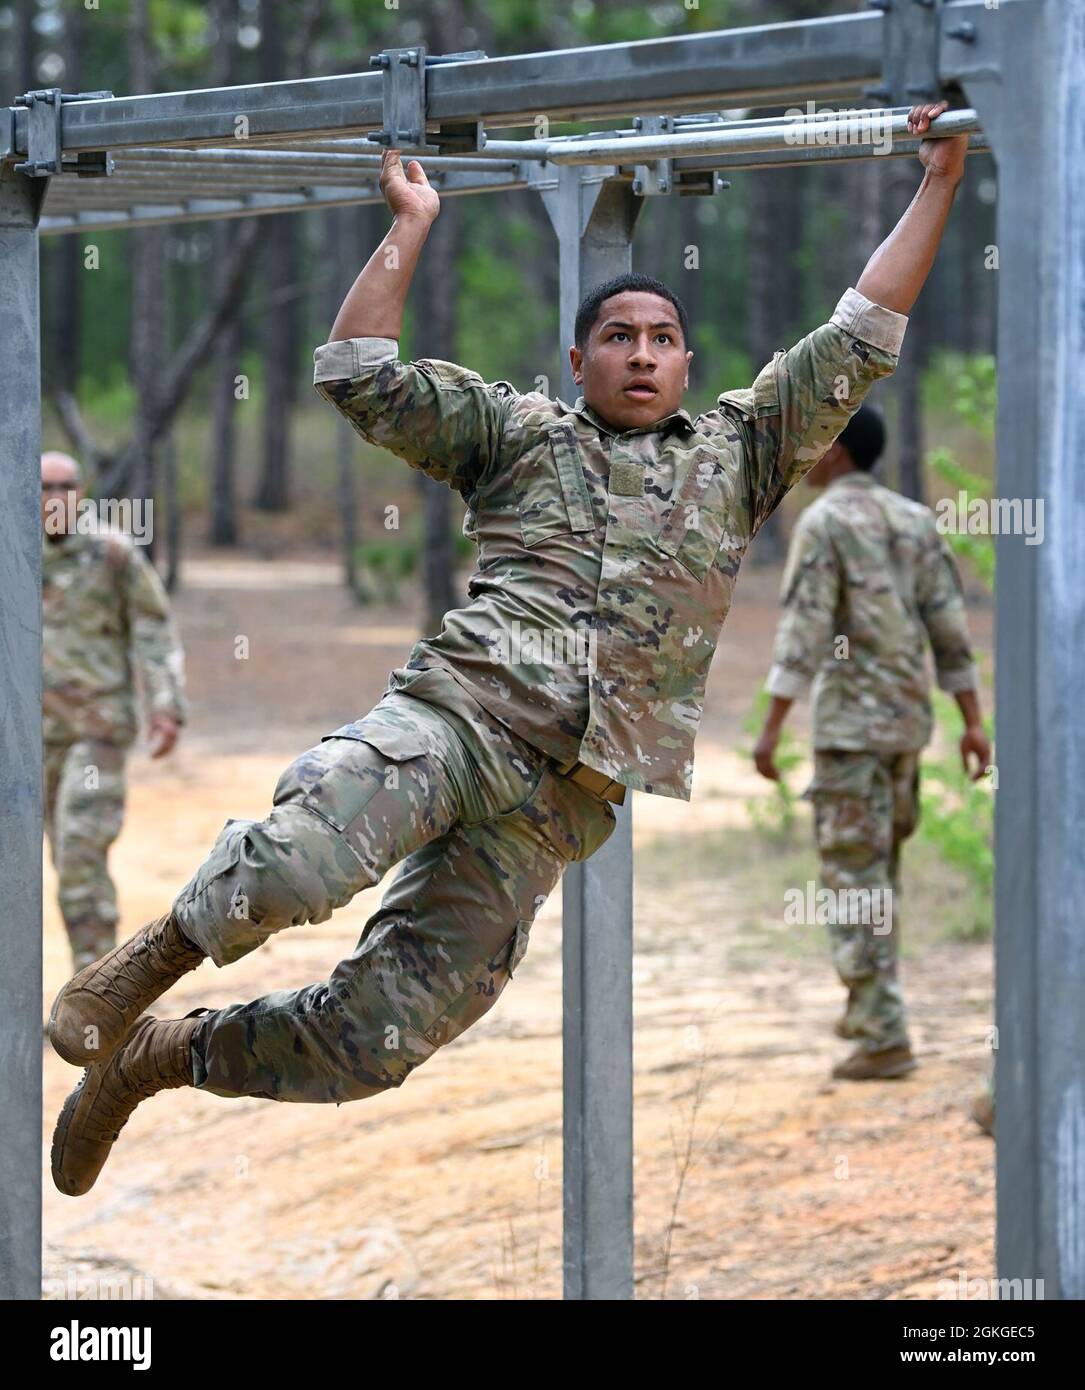 A Soldier from Support Battalion, 1st Special Warfare Training Group (Airborne) negotiates an obstacle during the battalion's Commander's Cup competition at Fort Bragg, North Carolina April 15, 2021. The Soldiers from each company competed in a ruck march, obstacle course, land navigation, Jeopardy-themed trivia contest and stress shoot with pistols and rifles. Stock Photo